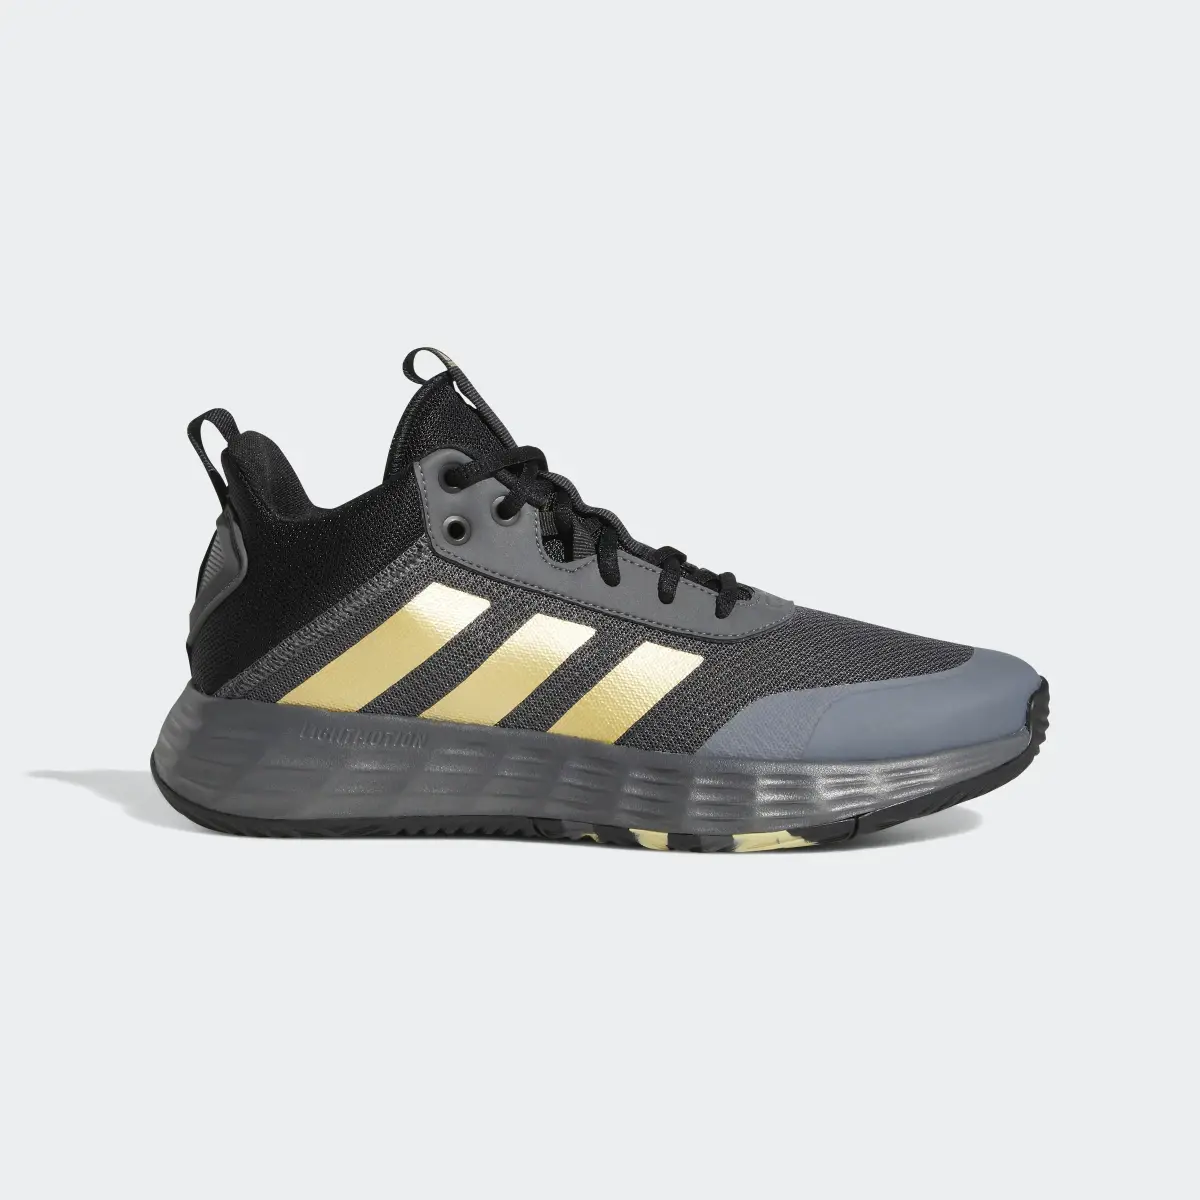 Adidas Ownthegame Basketball Shoes. 2